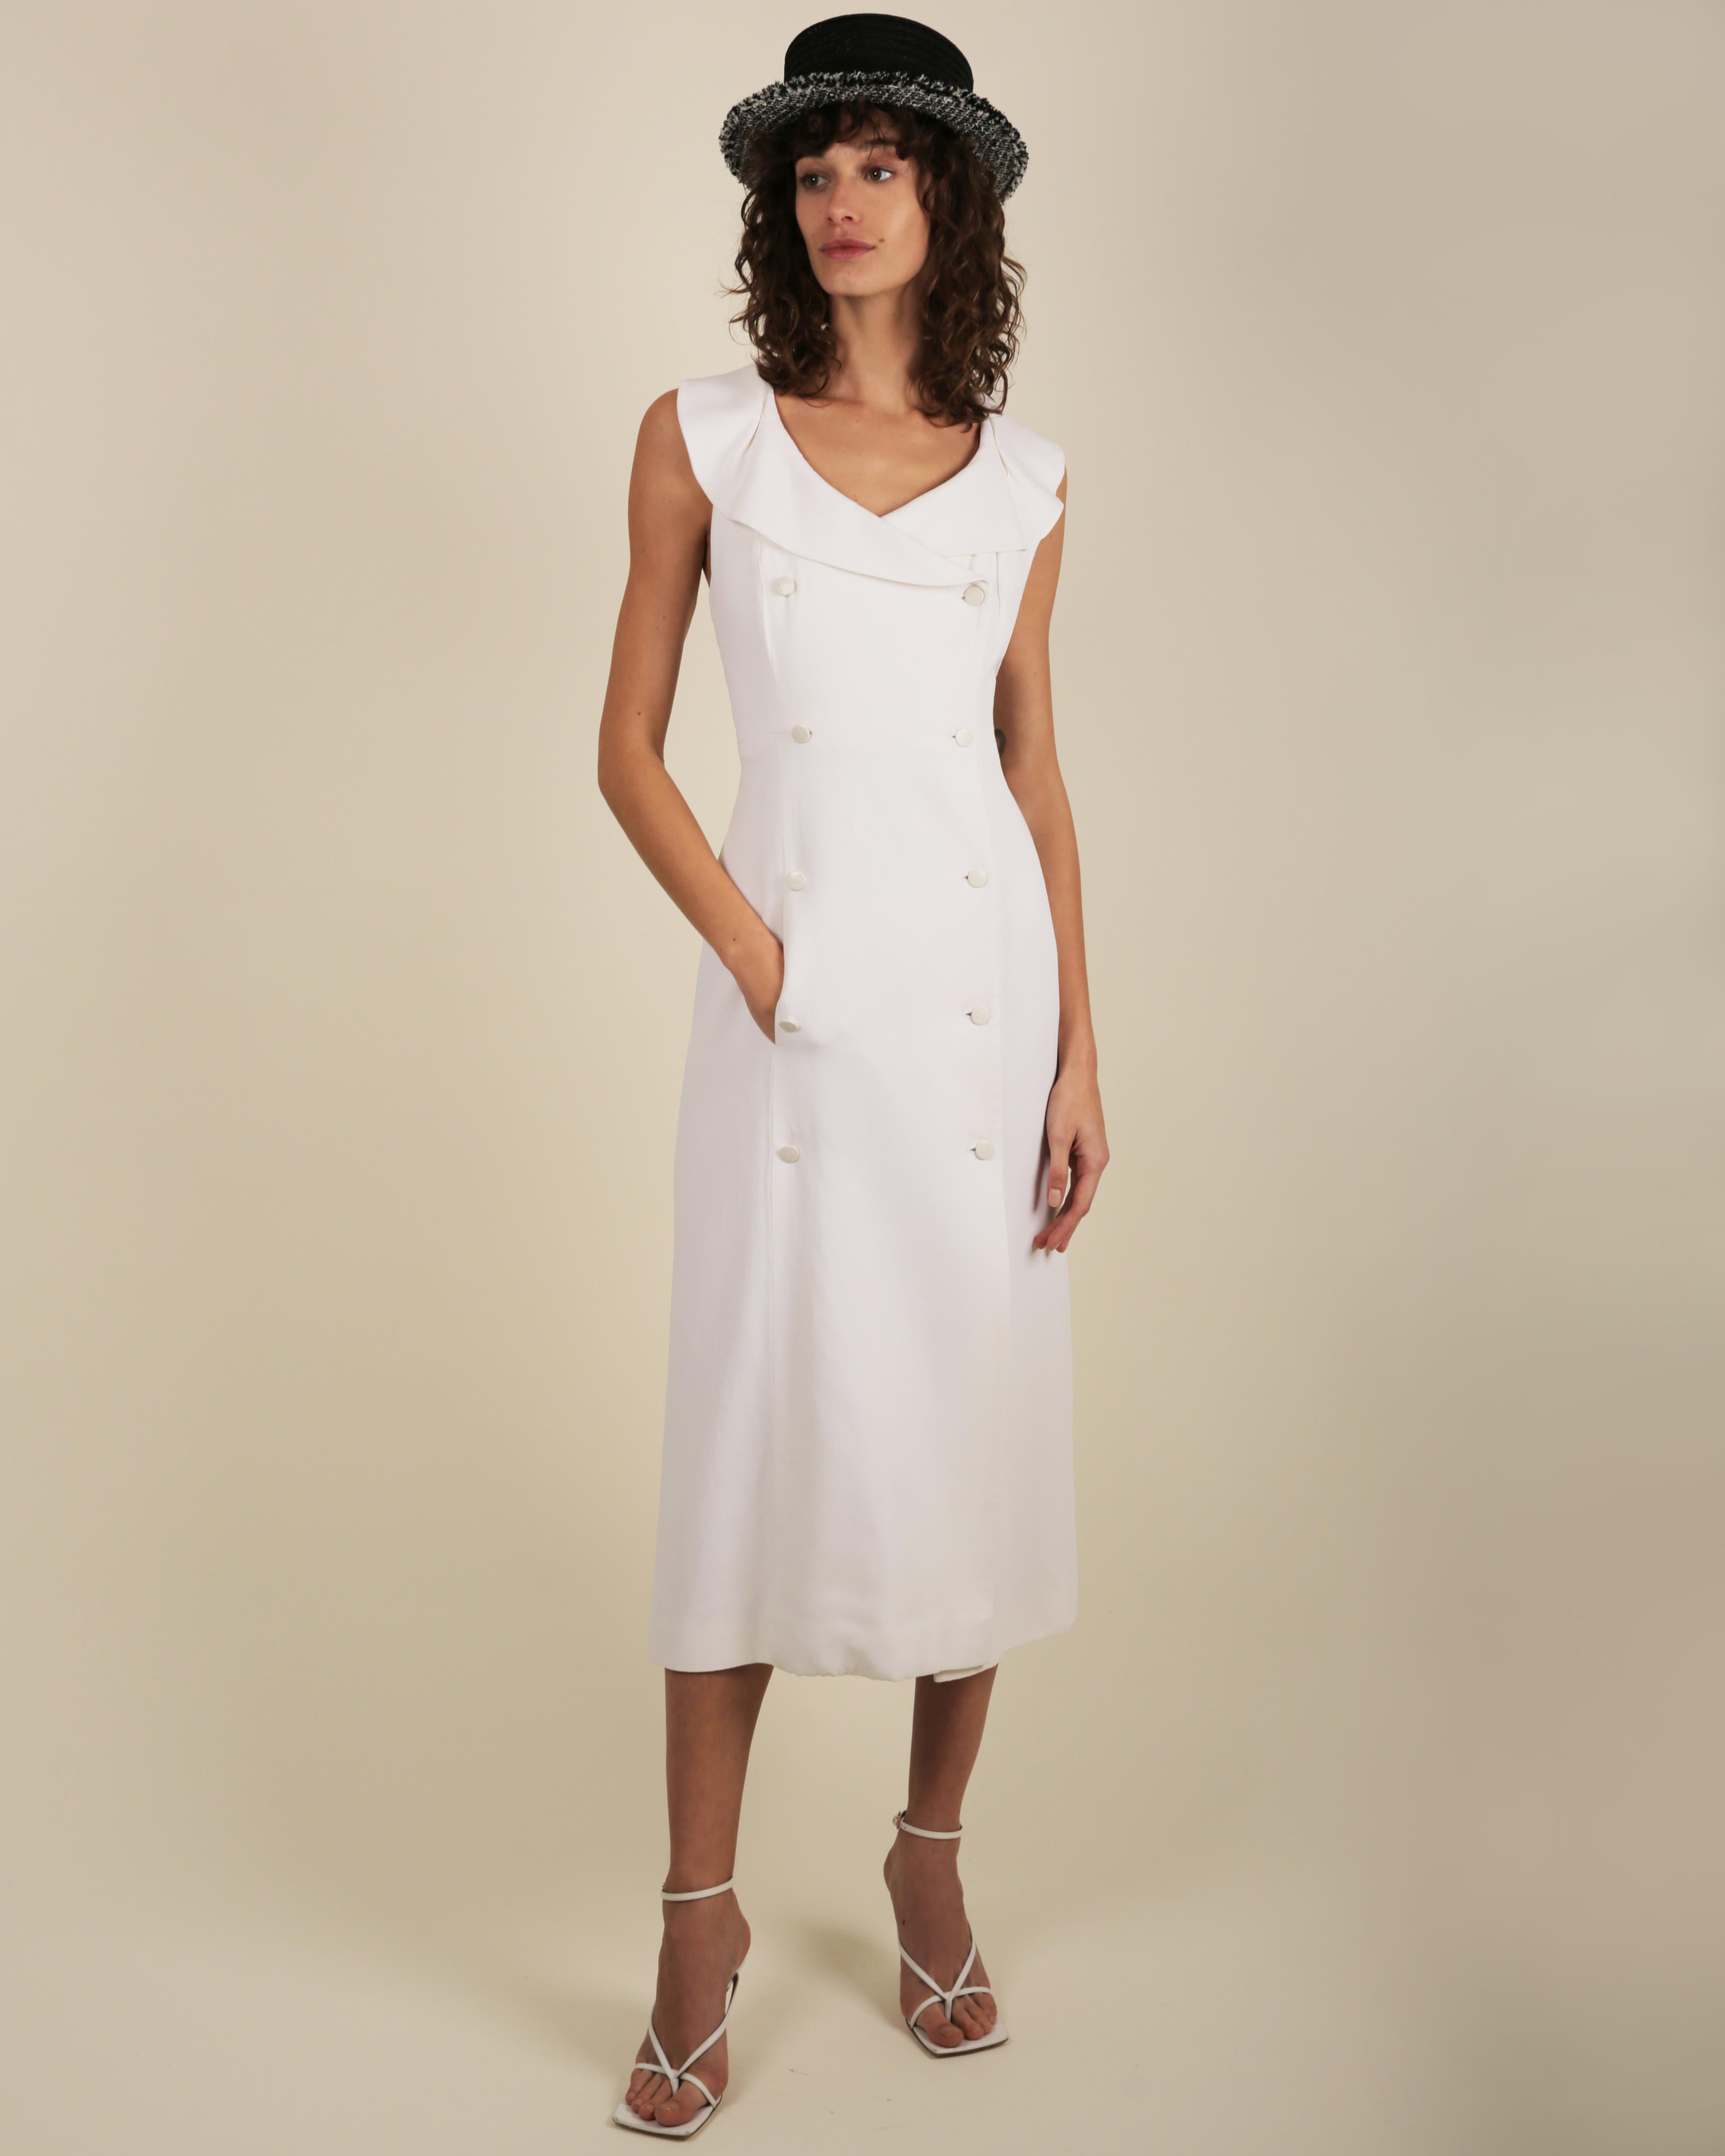 Women's Chanel cruise 1997 vintage white wedding midi dress with logo button up front   For Sale